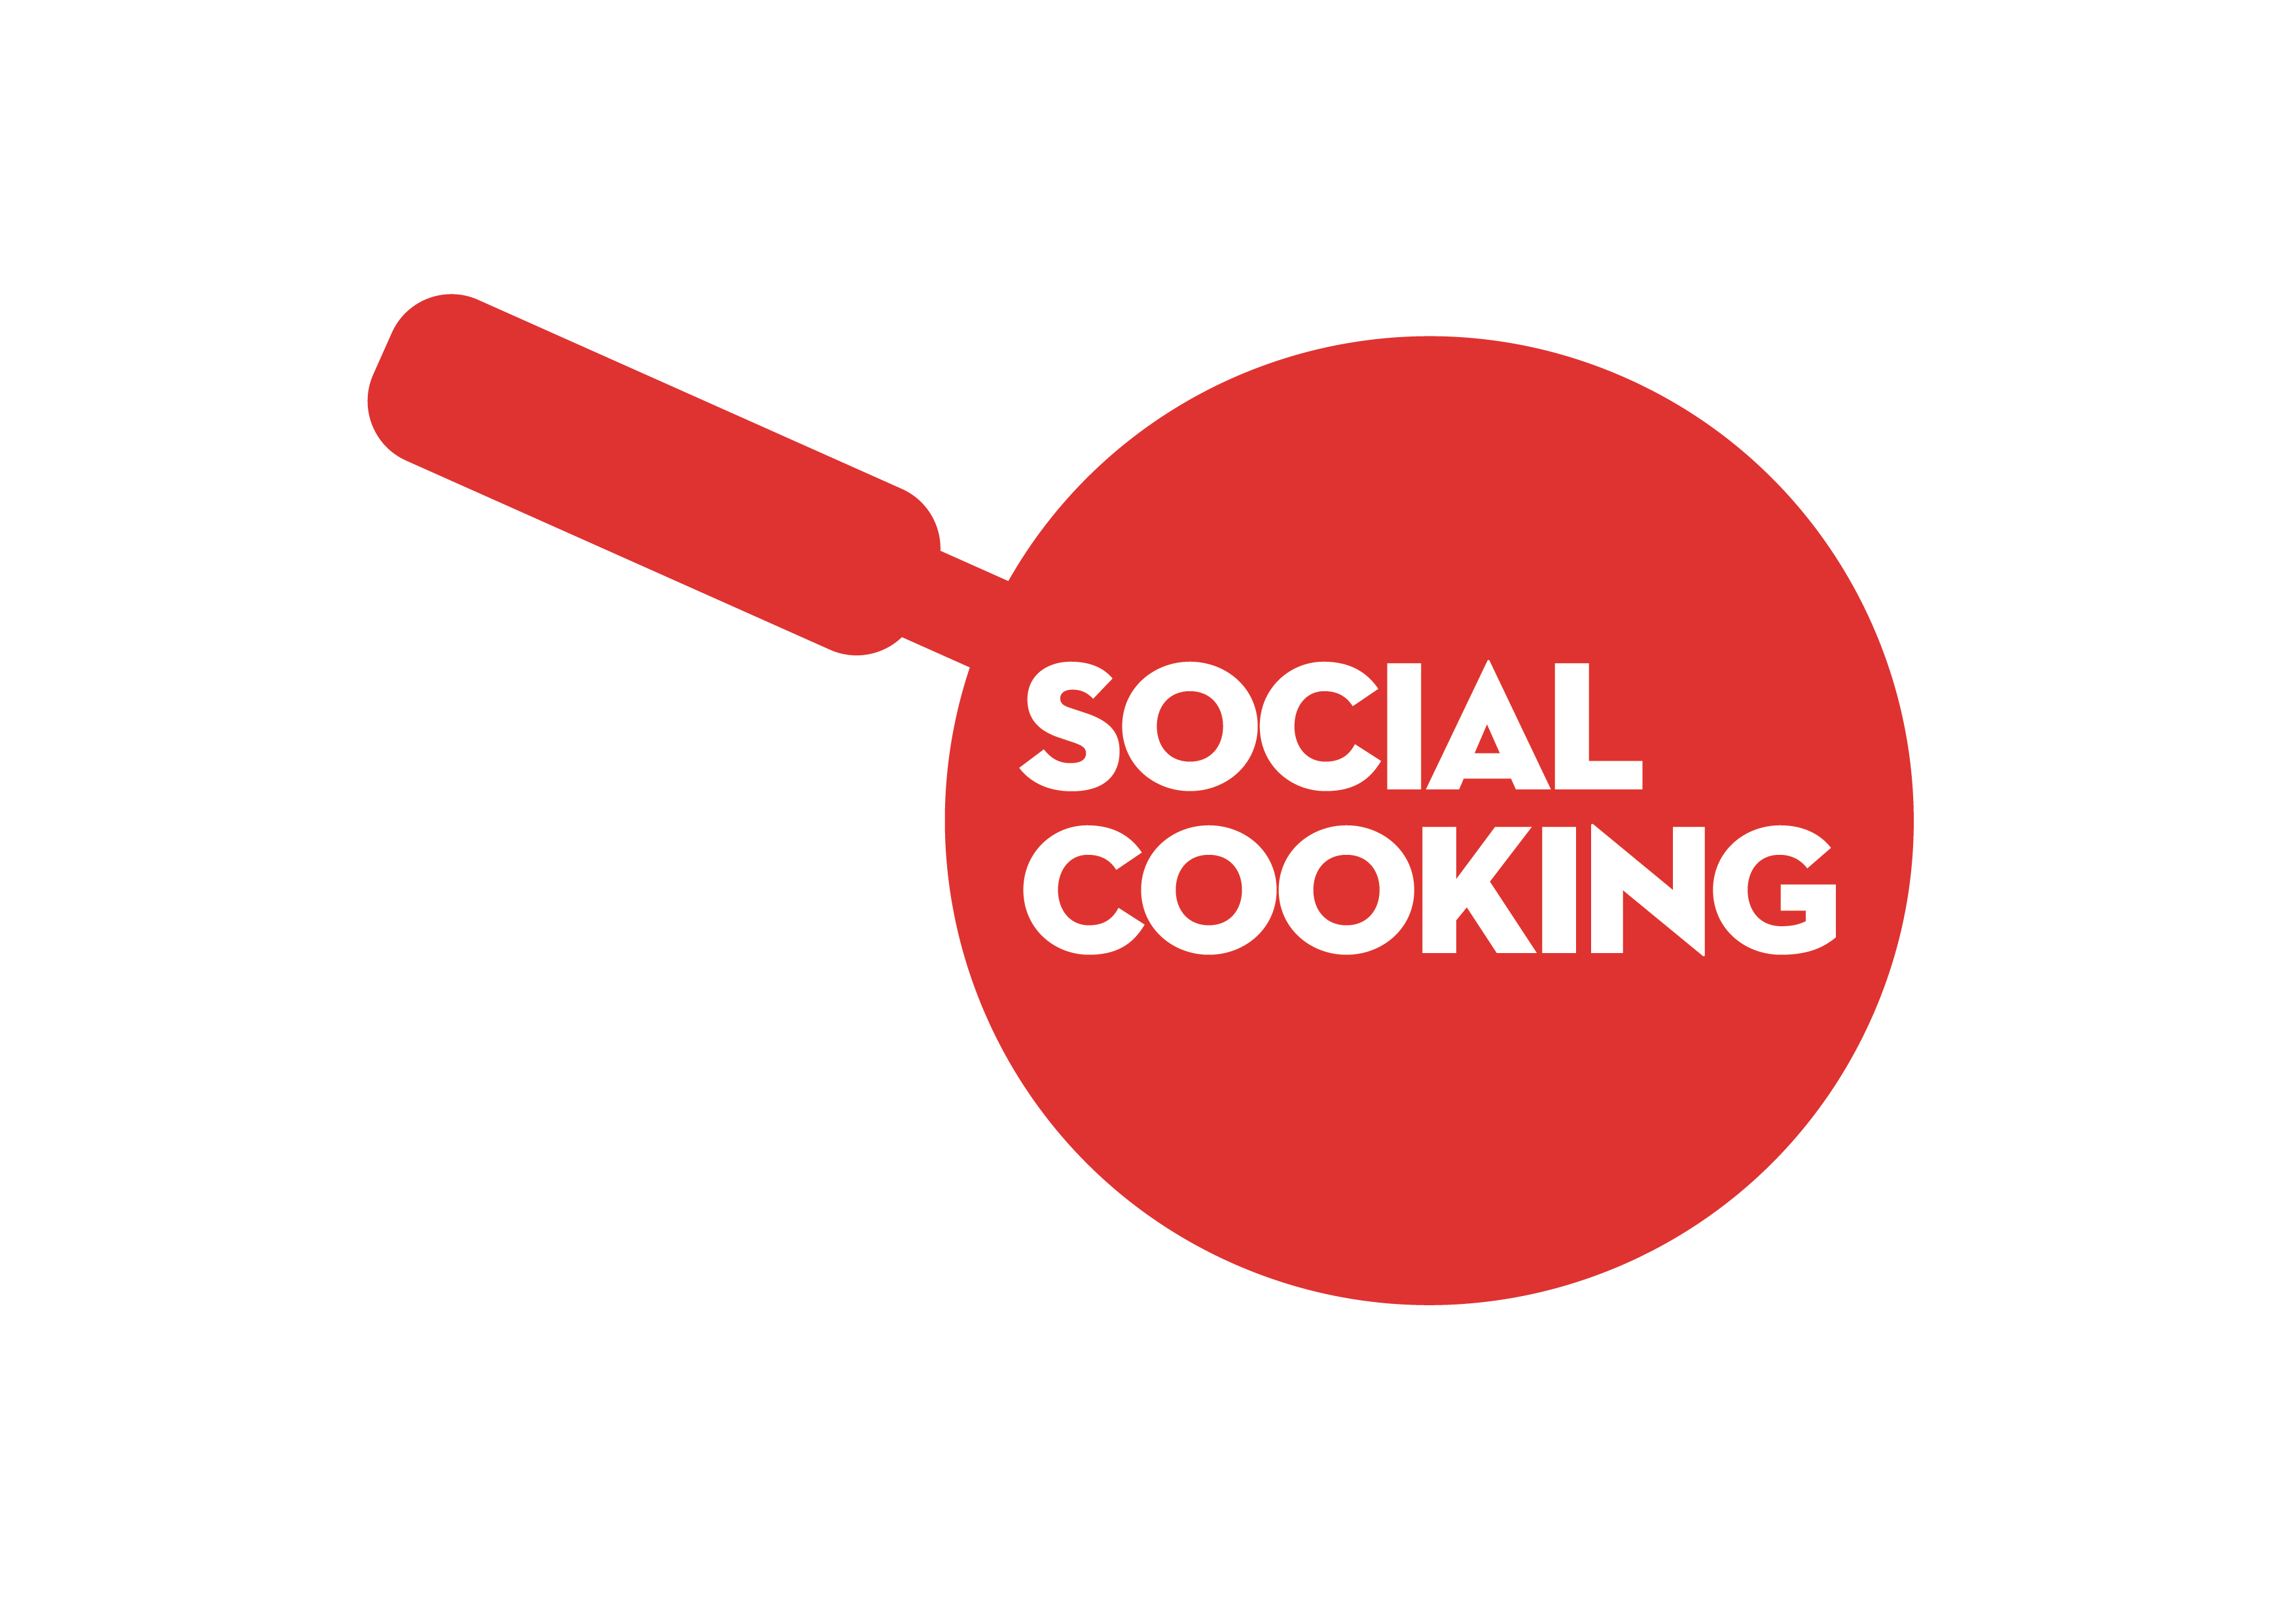 
Social Cooking